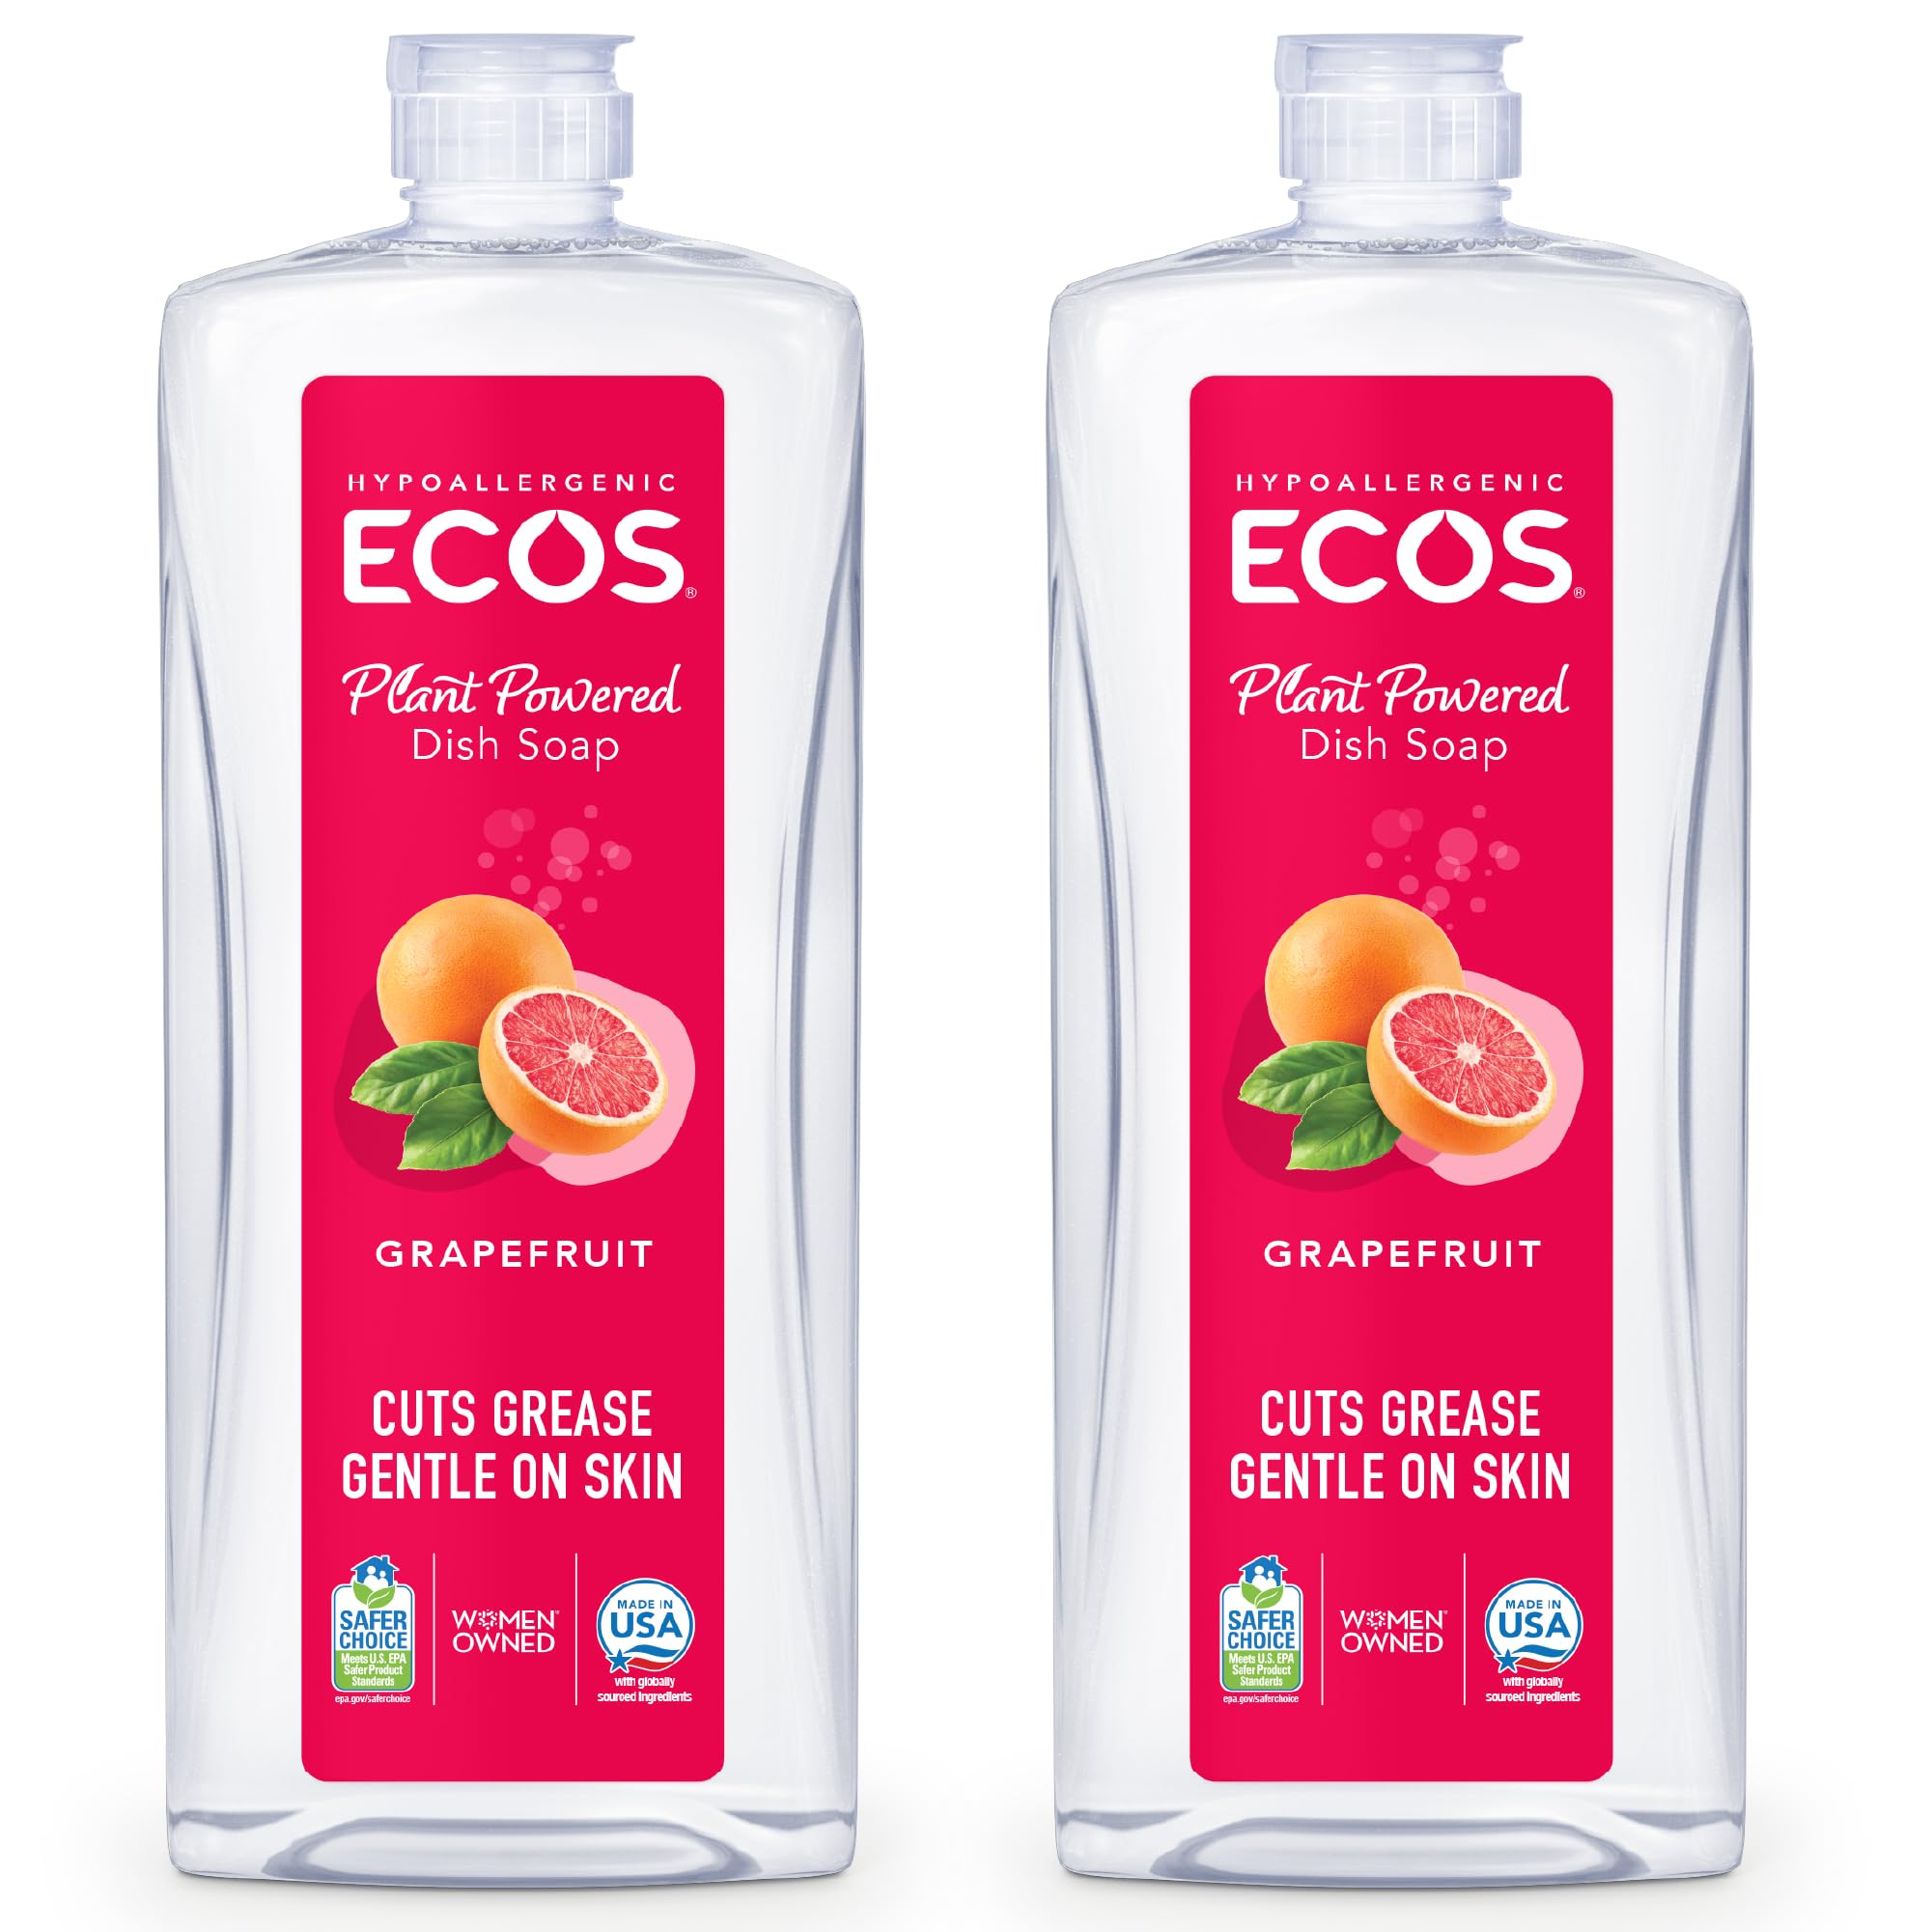 ECOS Dish Soap 25 oz - Grapefruit (Pack of 2) Free Shipping with Prime $5.19